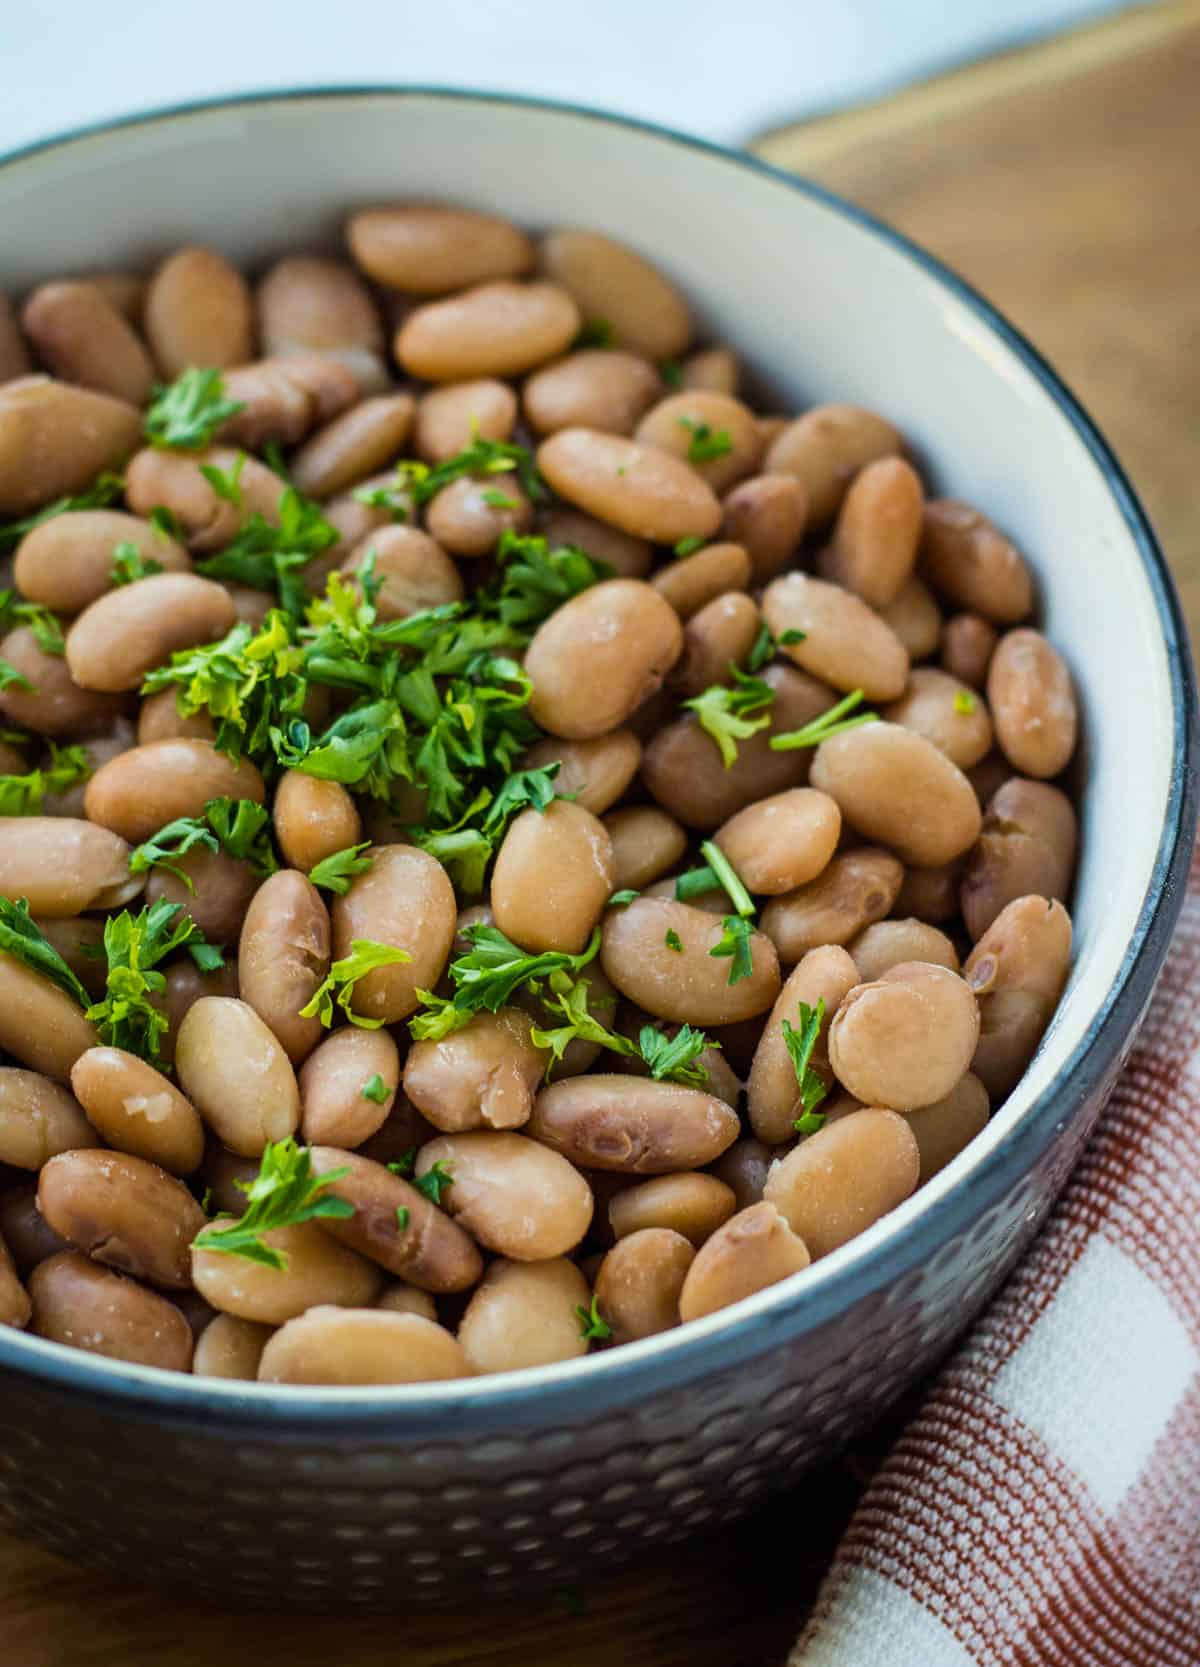 a bowl of cooked pinto beans with parsely for garnish